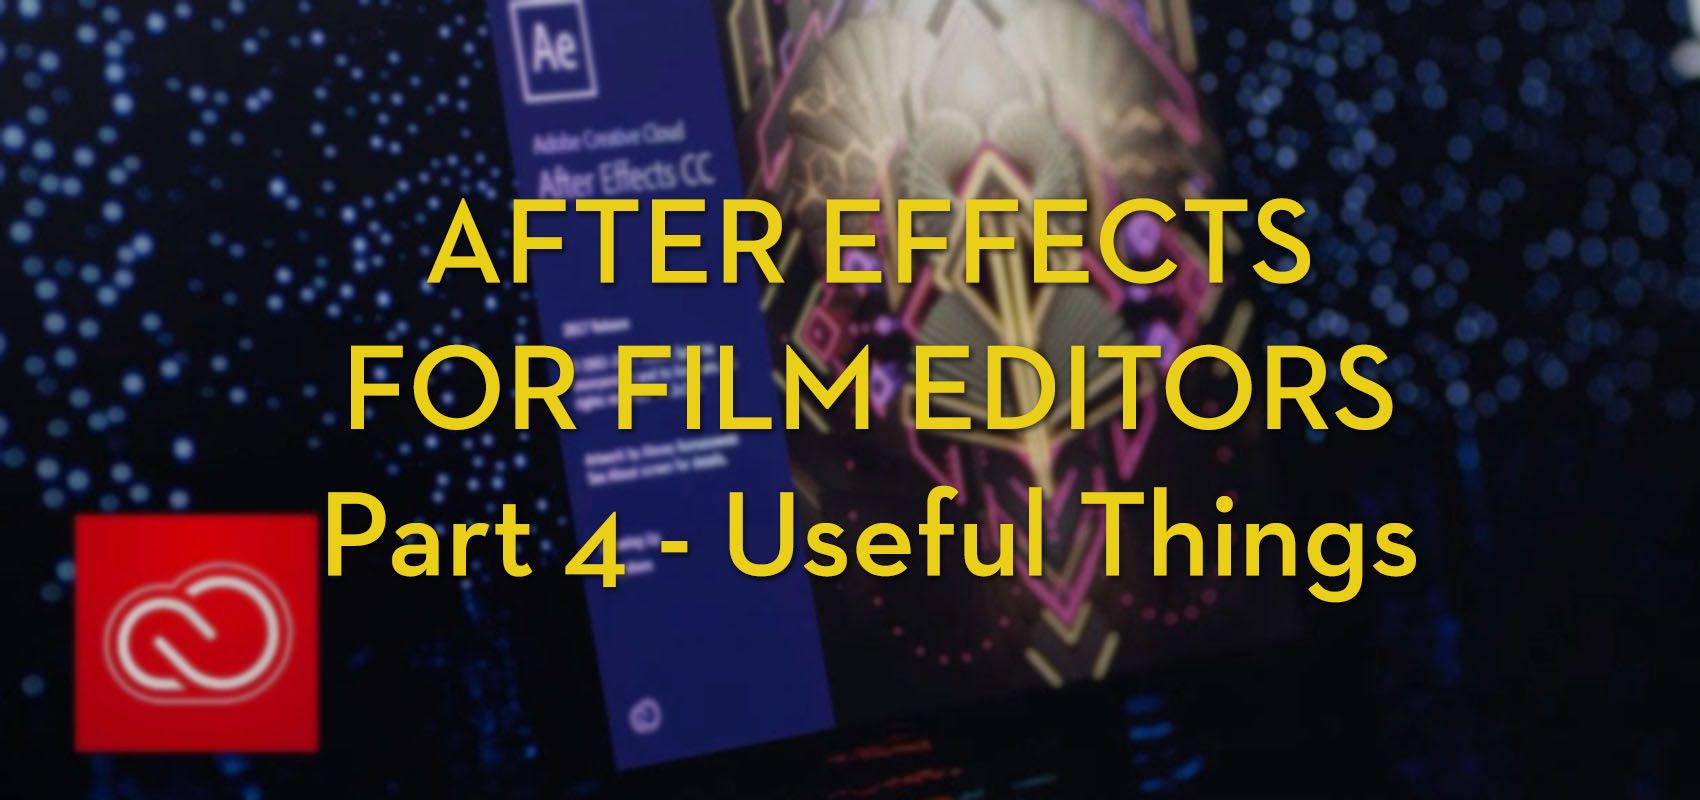 after effects freebies for film editors